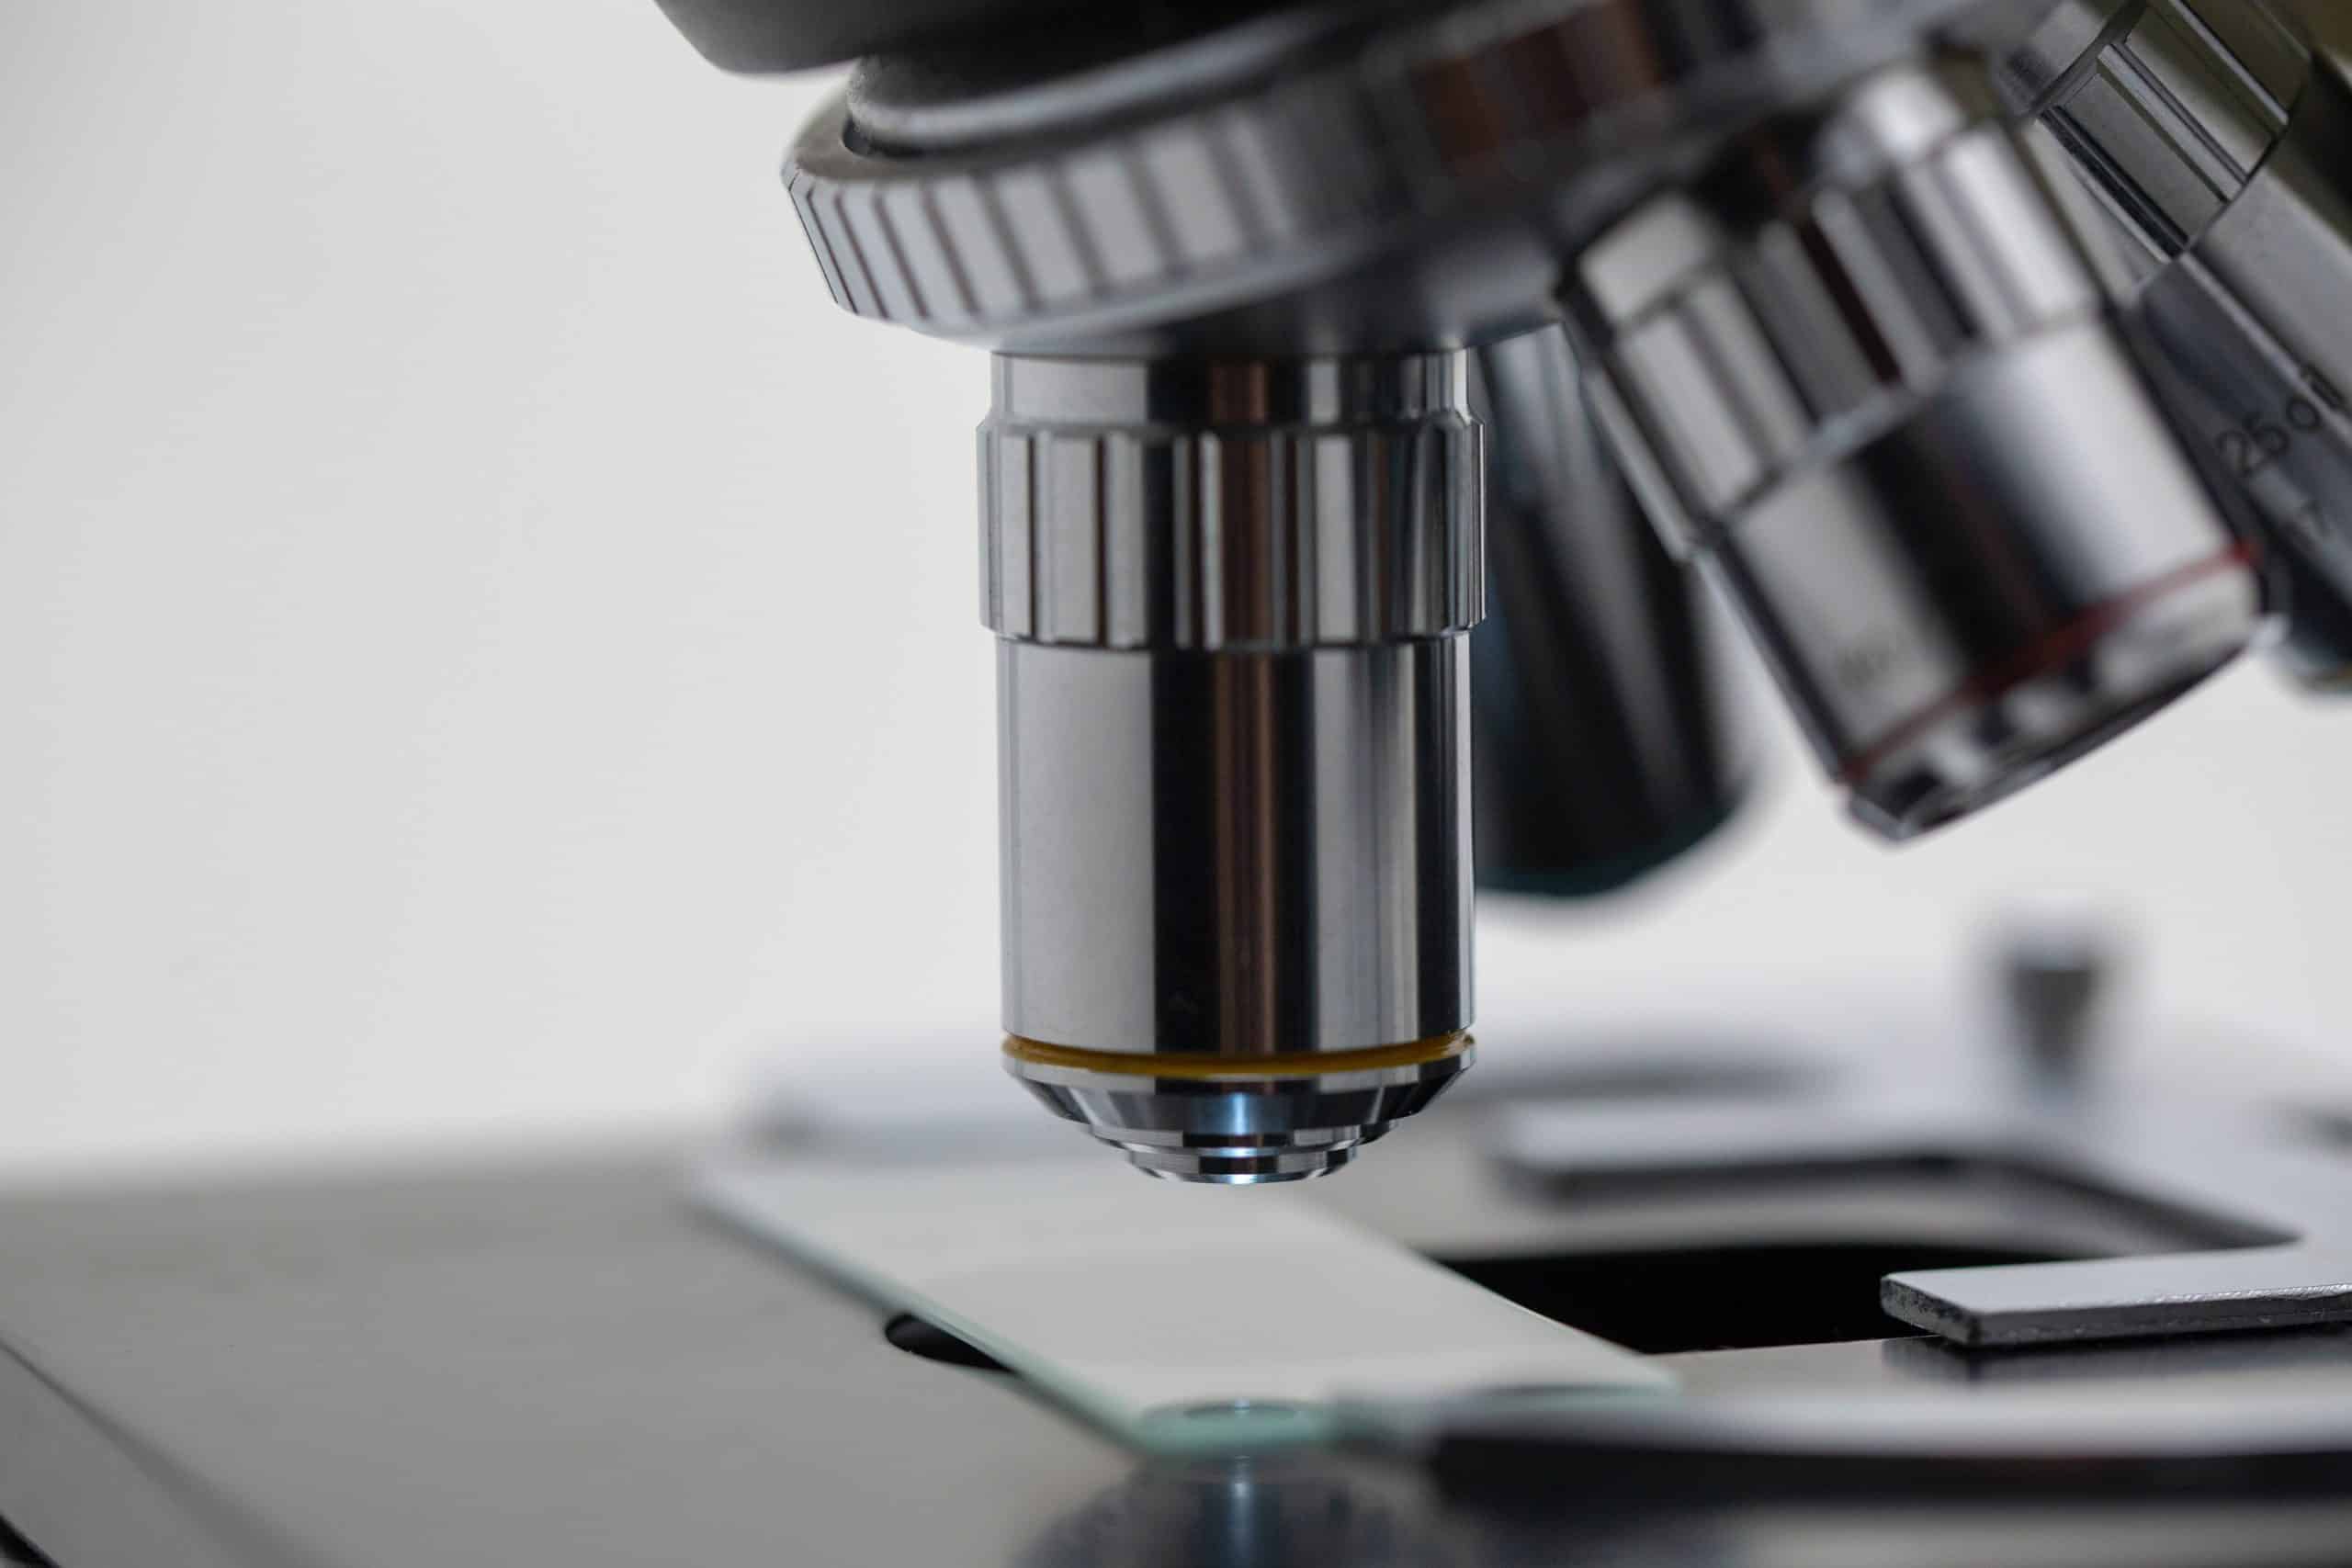 The Ultimate Guide To Choosing The Best Microscopes In 2021